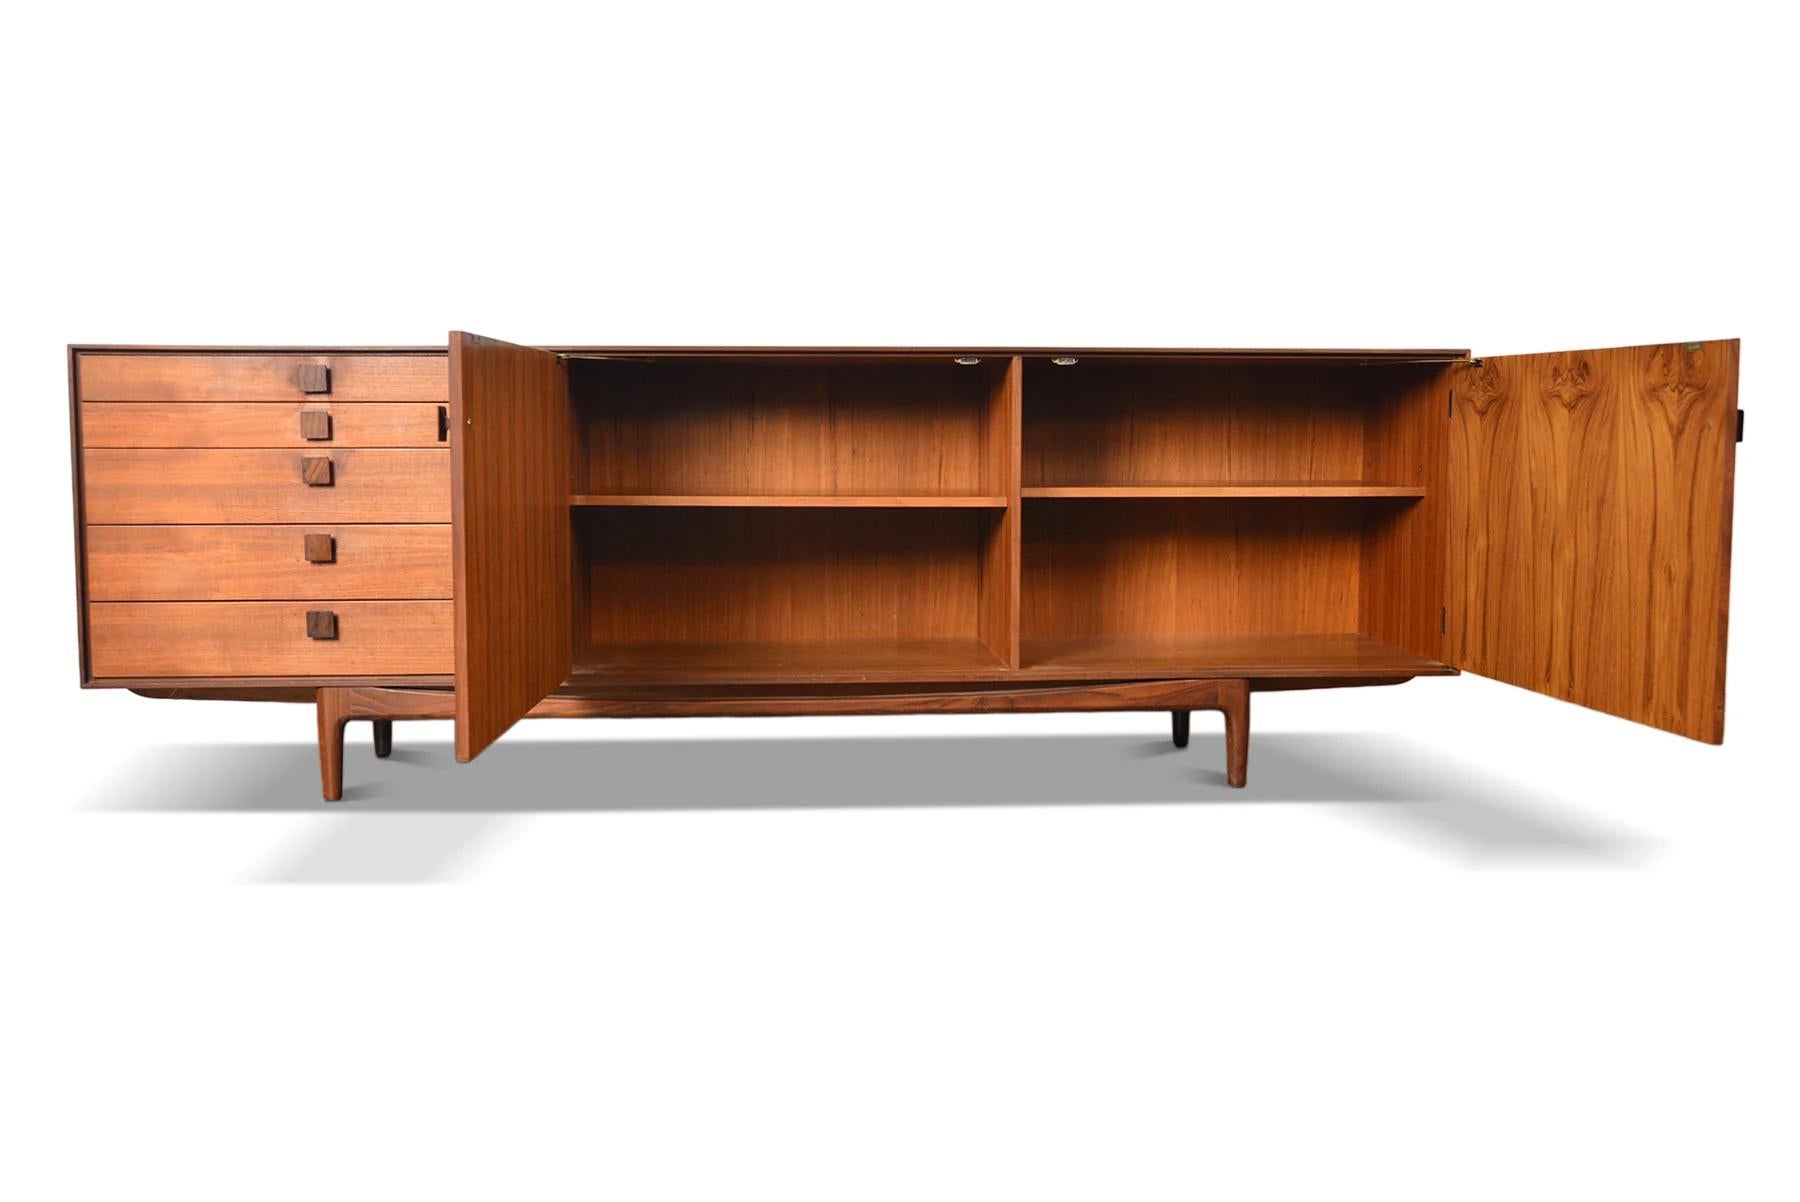 Origin: Denmark
Designer: Ib Kofod Larsen
Manufacturer: G Plan
Era: 1961
Materials: Teak, Afromosia
Measurements: 92.5″ wide x 19.5″ deep x 30″ tall

Condition: In excellent original condition with typical wear for its vintage. Price includes a full